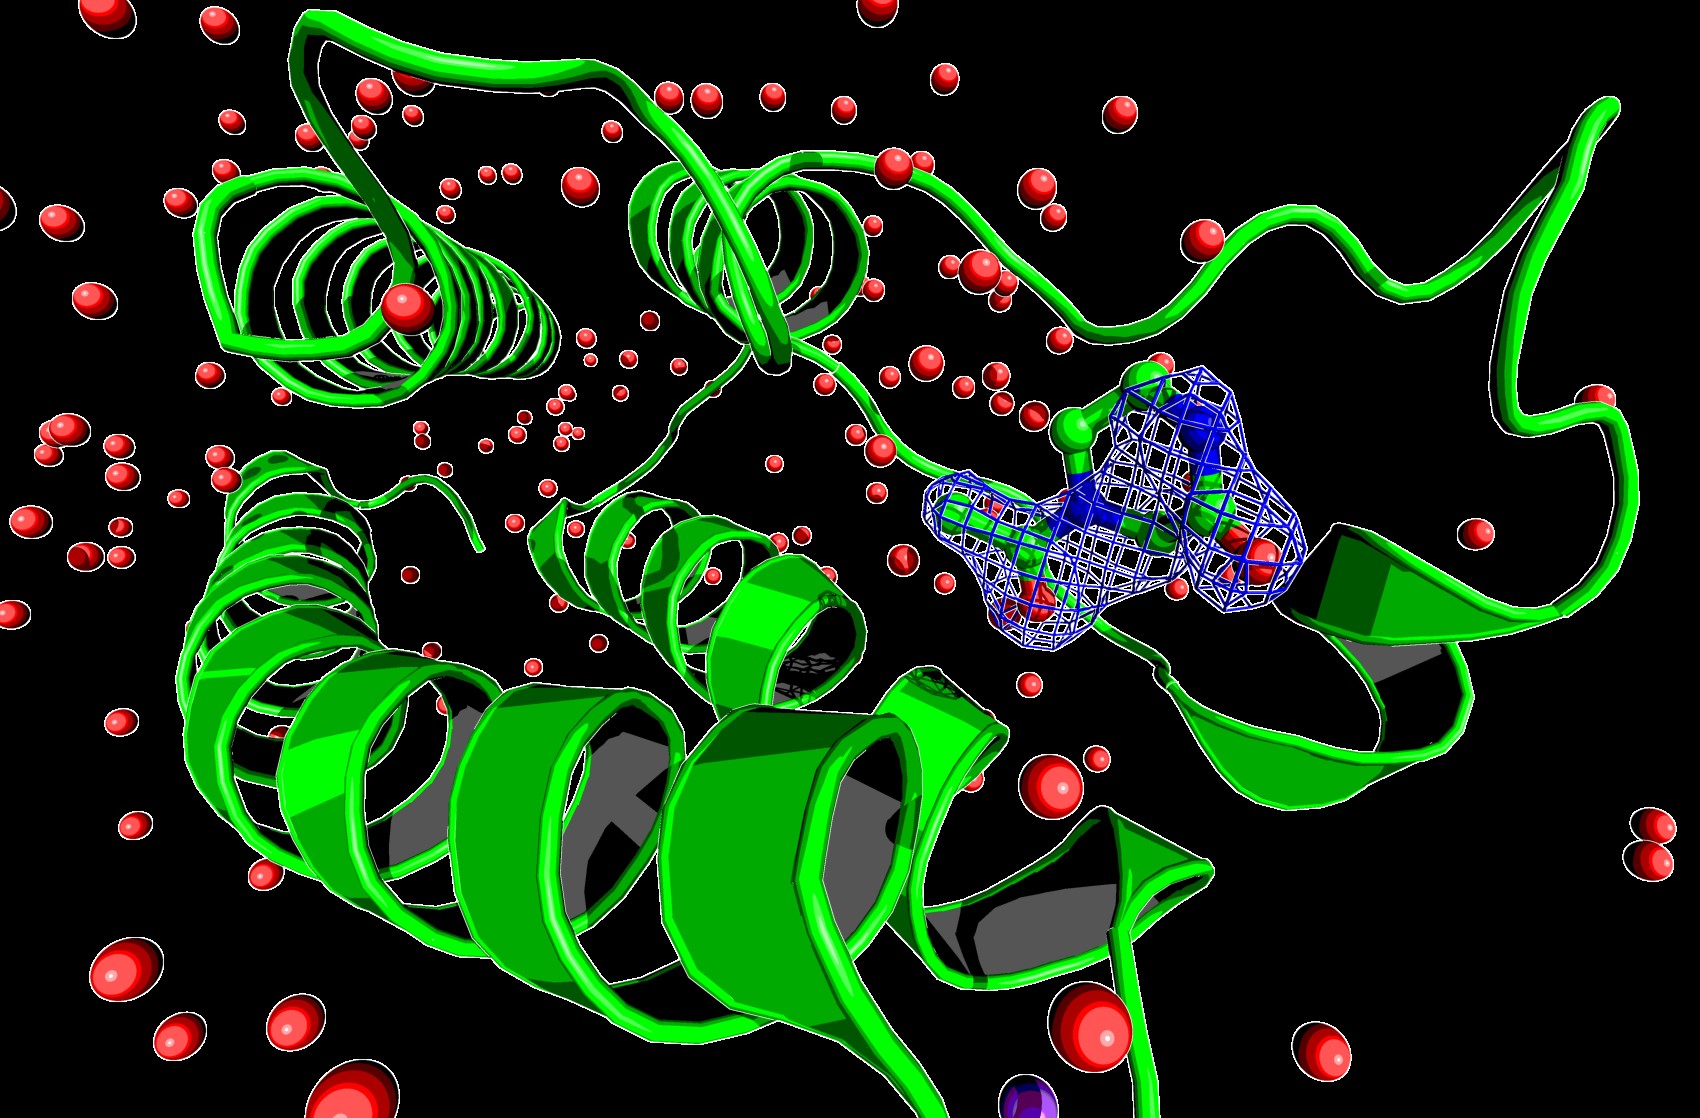 Electron density for a ligand bound to bromodomain BRD1.